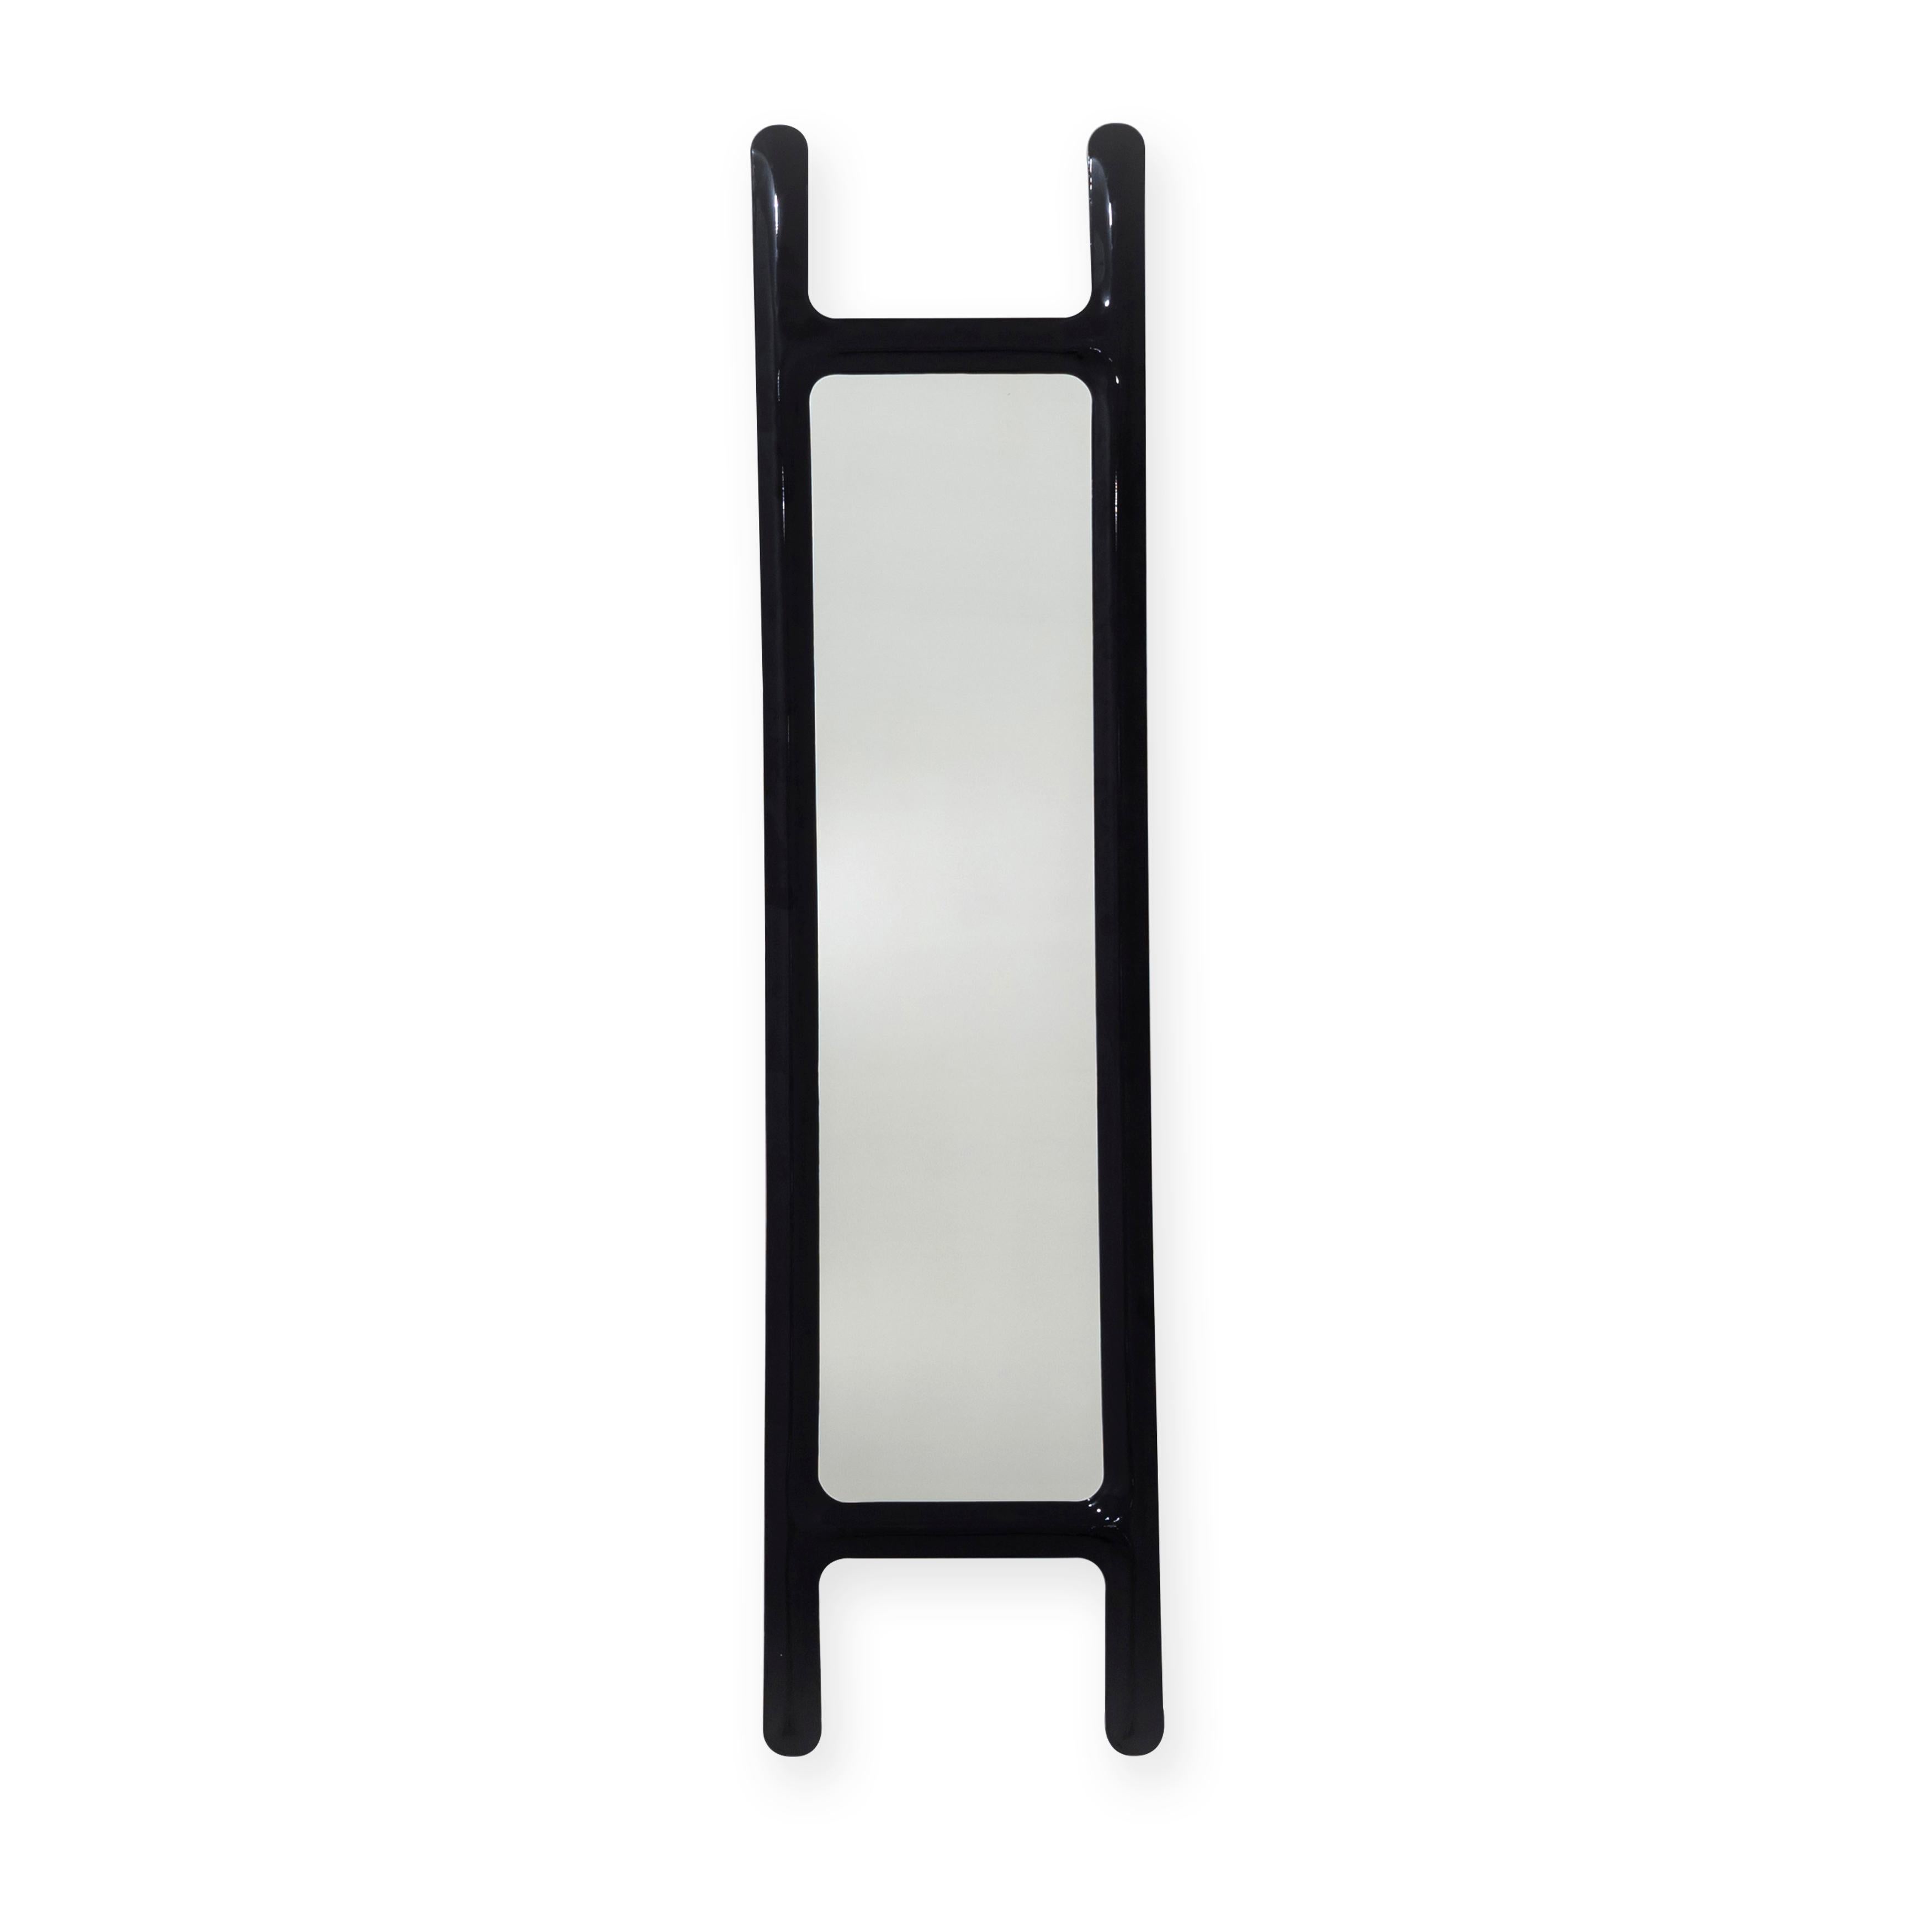 Black drab sculptural wall mirror by Zieta
Dimensions: D 6 x W 46 x H 188 cm 
Material: Mirror, carbon steel. 
Finish: Powder-coated in black glossy.
Also available in colors: stainless steel, or powder-coated. 


A DRAB mirror is an object